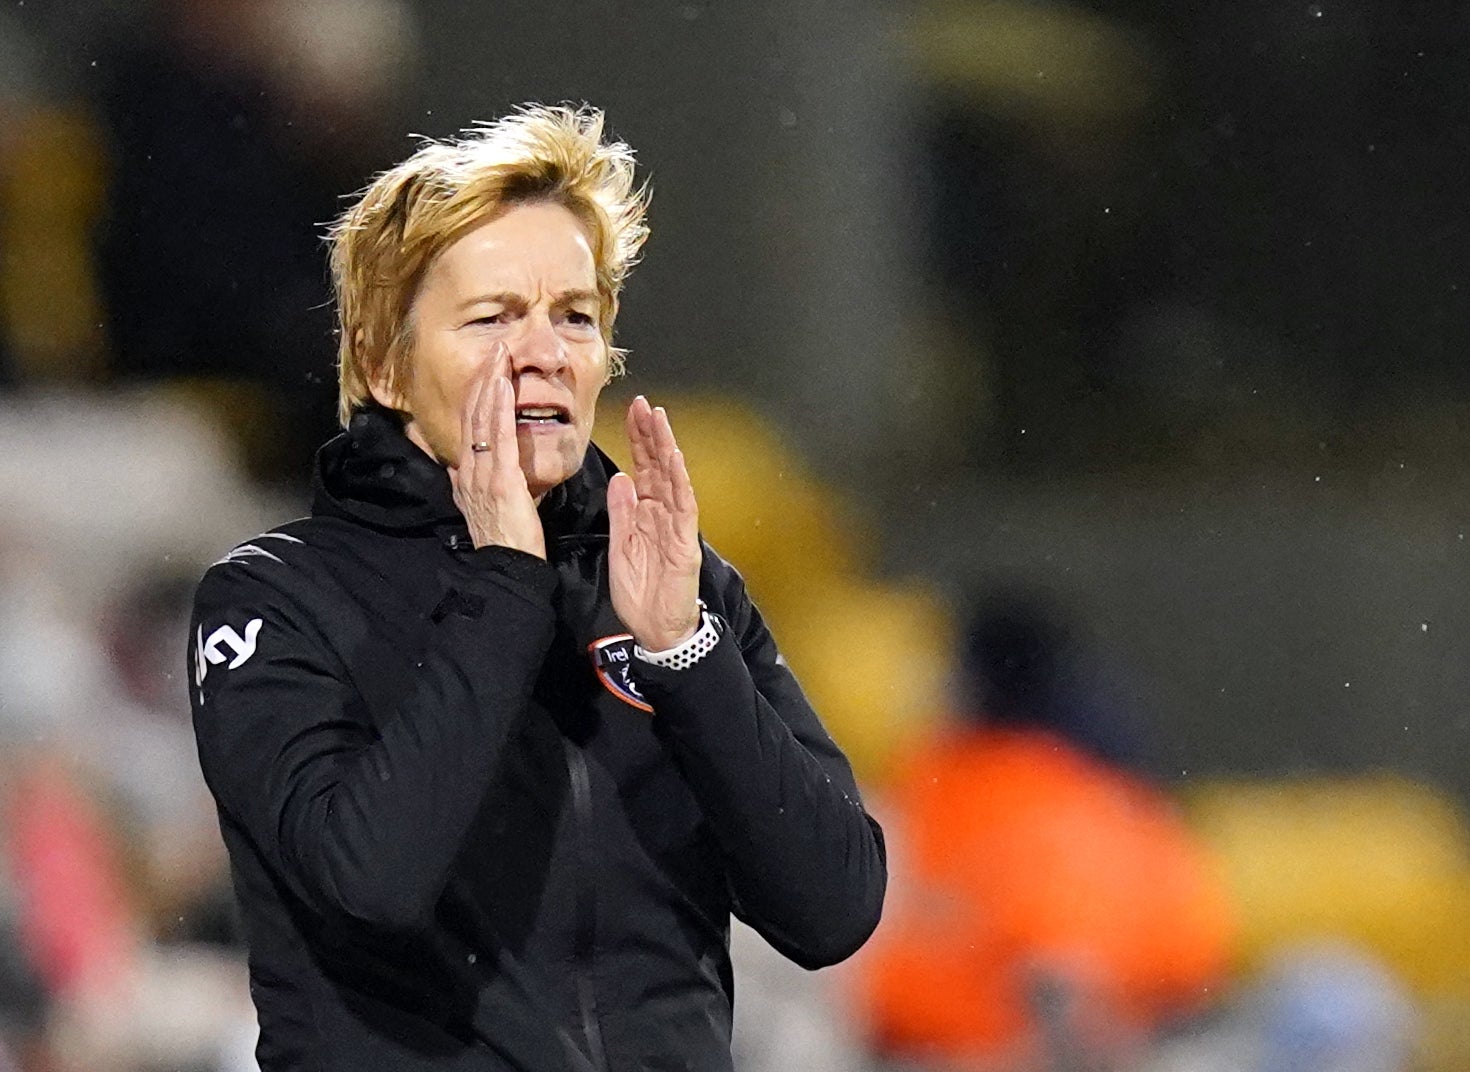 Vera Pauw was appointed as Republic of Ireland Women’s head coach in September 2019